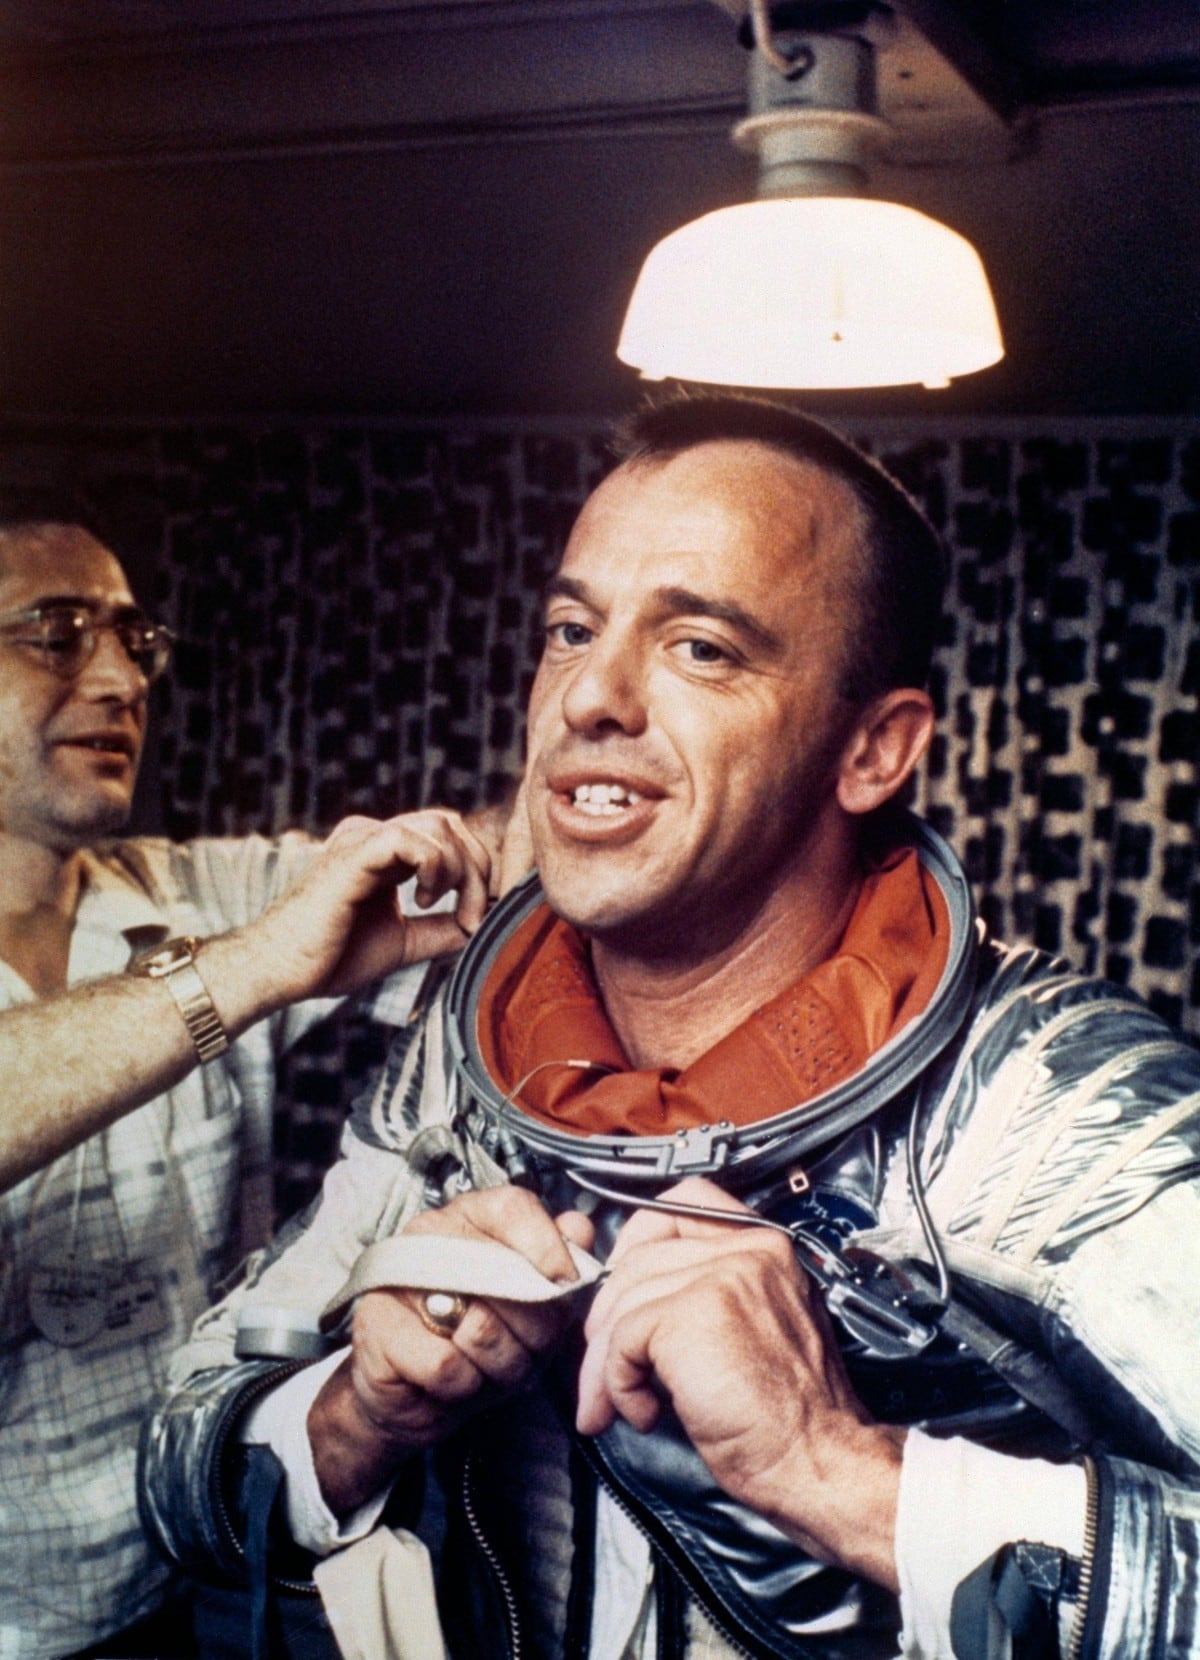 alan shepard, america's first man in space, puts on his navy mark iv spacesuit